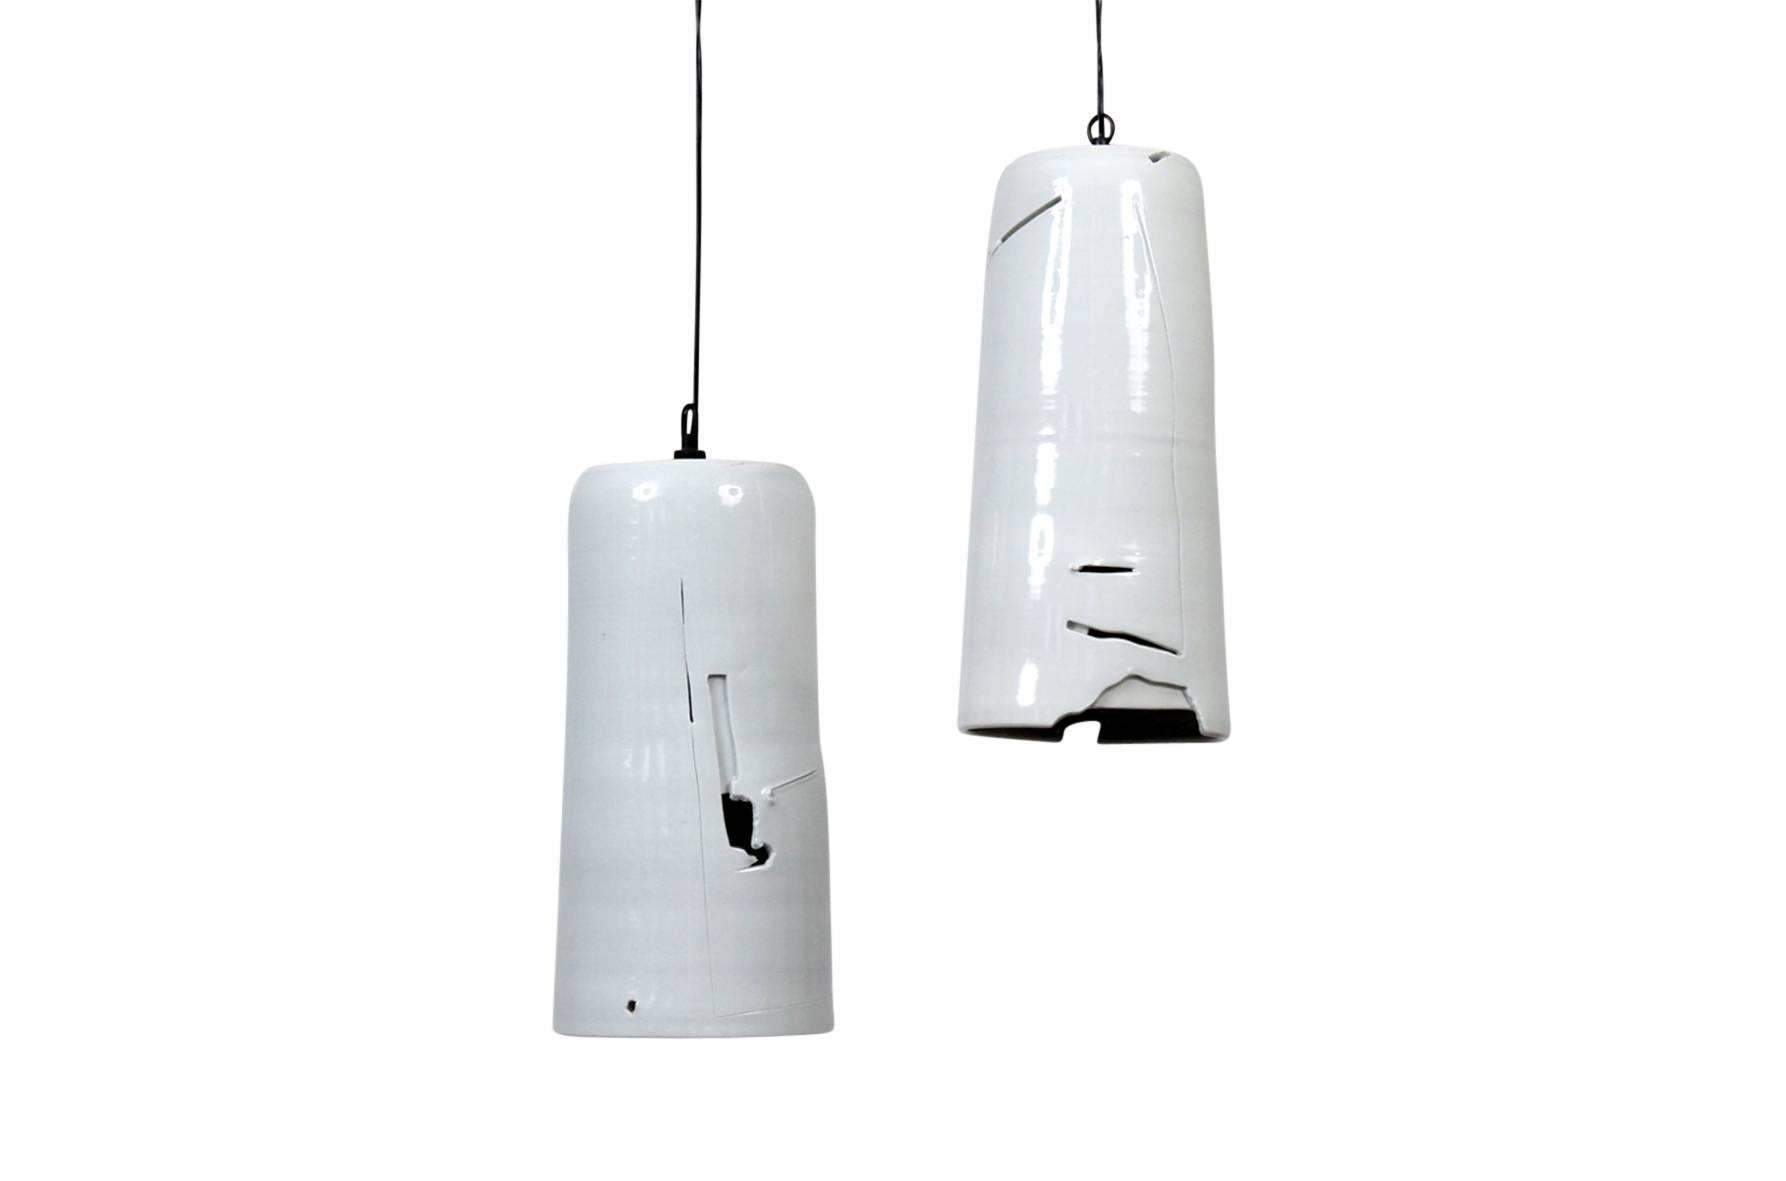 Pair of porcelain hanging pendants by ceramic artist Don Williams. Each cylindrical pendant with carved and sliced abstract decoration through which light escapes. Reminiscent of the Abstract Expressionist spirit of ceramicist Peter Voulkos’ work.